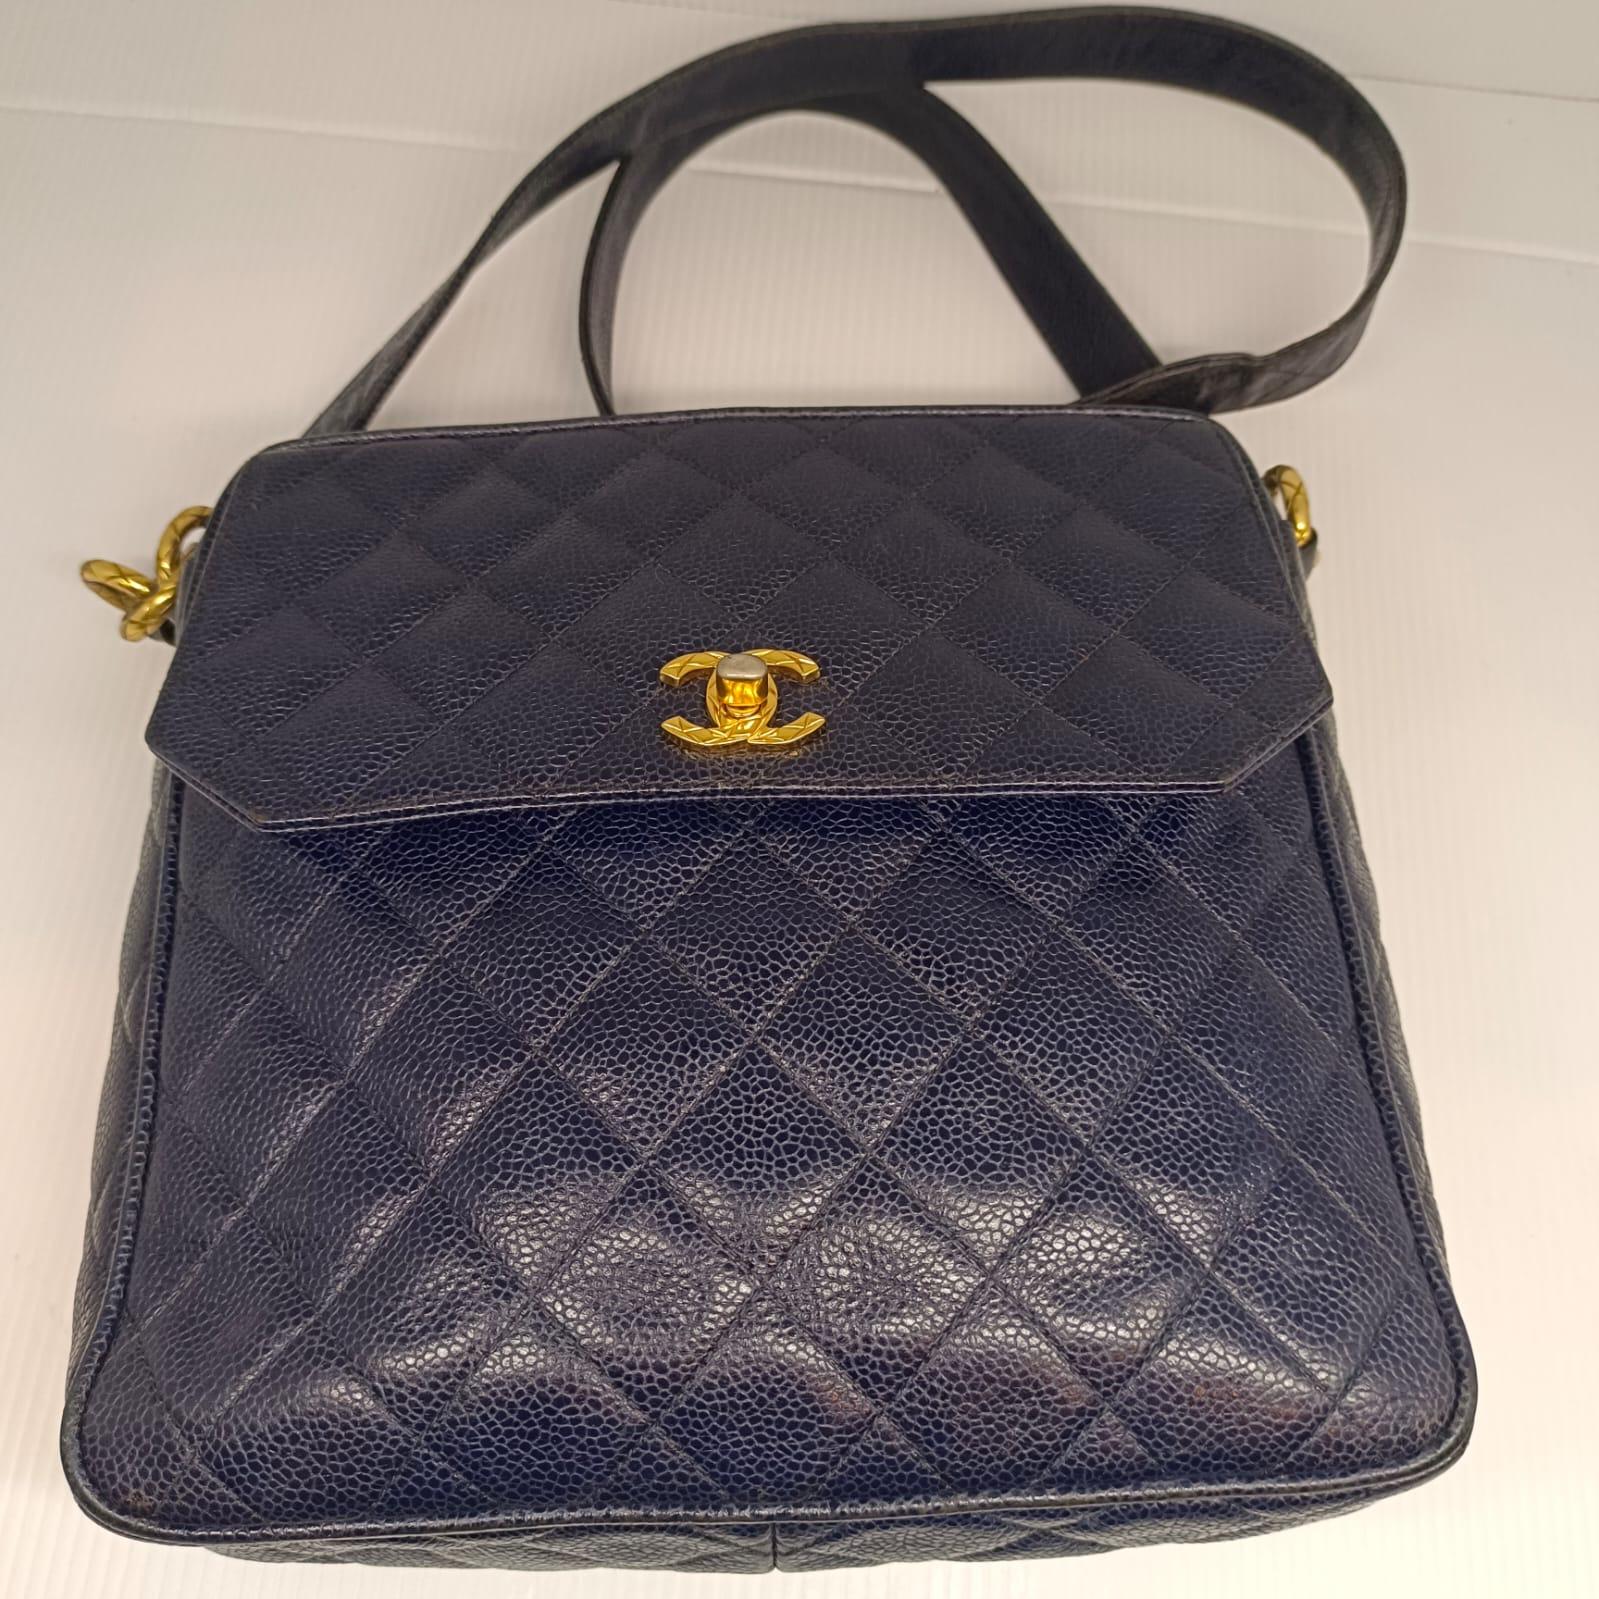 Vintage navy caviar sling bag with gold hardware. Overall in worn vintage condition, with slight lose of shape. Faint scuffing on the bag. Turn lock shows slight tarnishing as seen on pictures. Comes with its holo sticker only. Series #2.